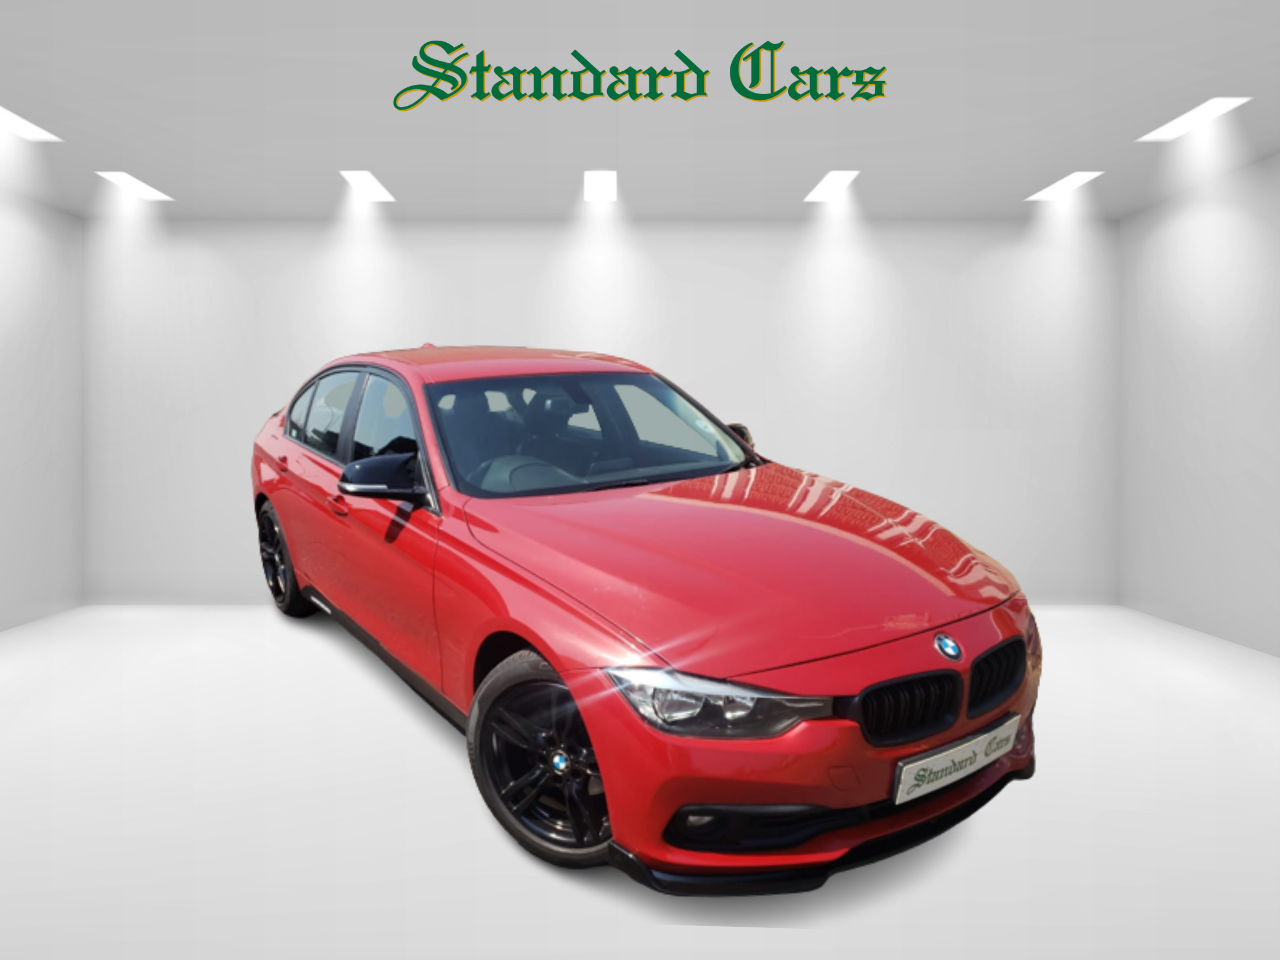 2016 BMW 3 Series 320i For Sale